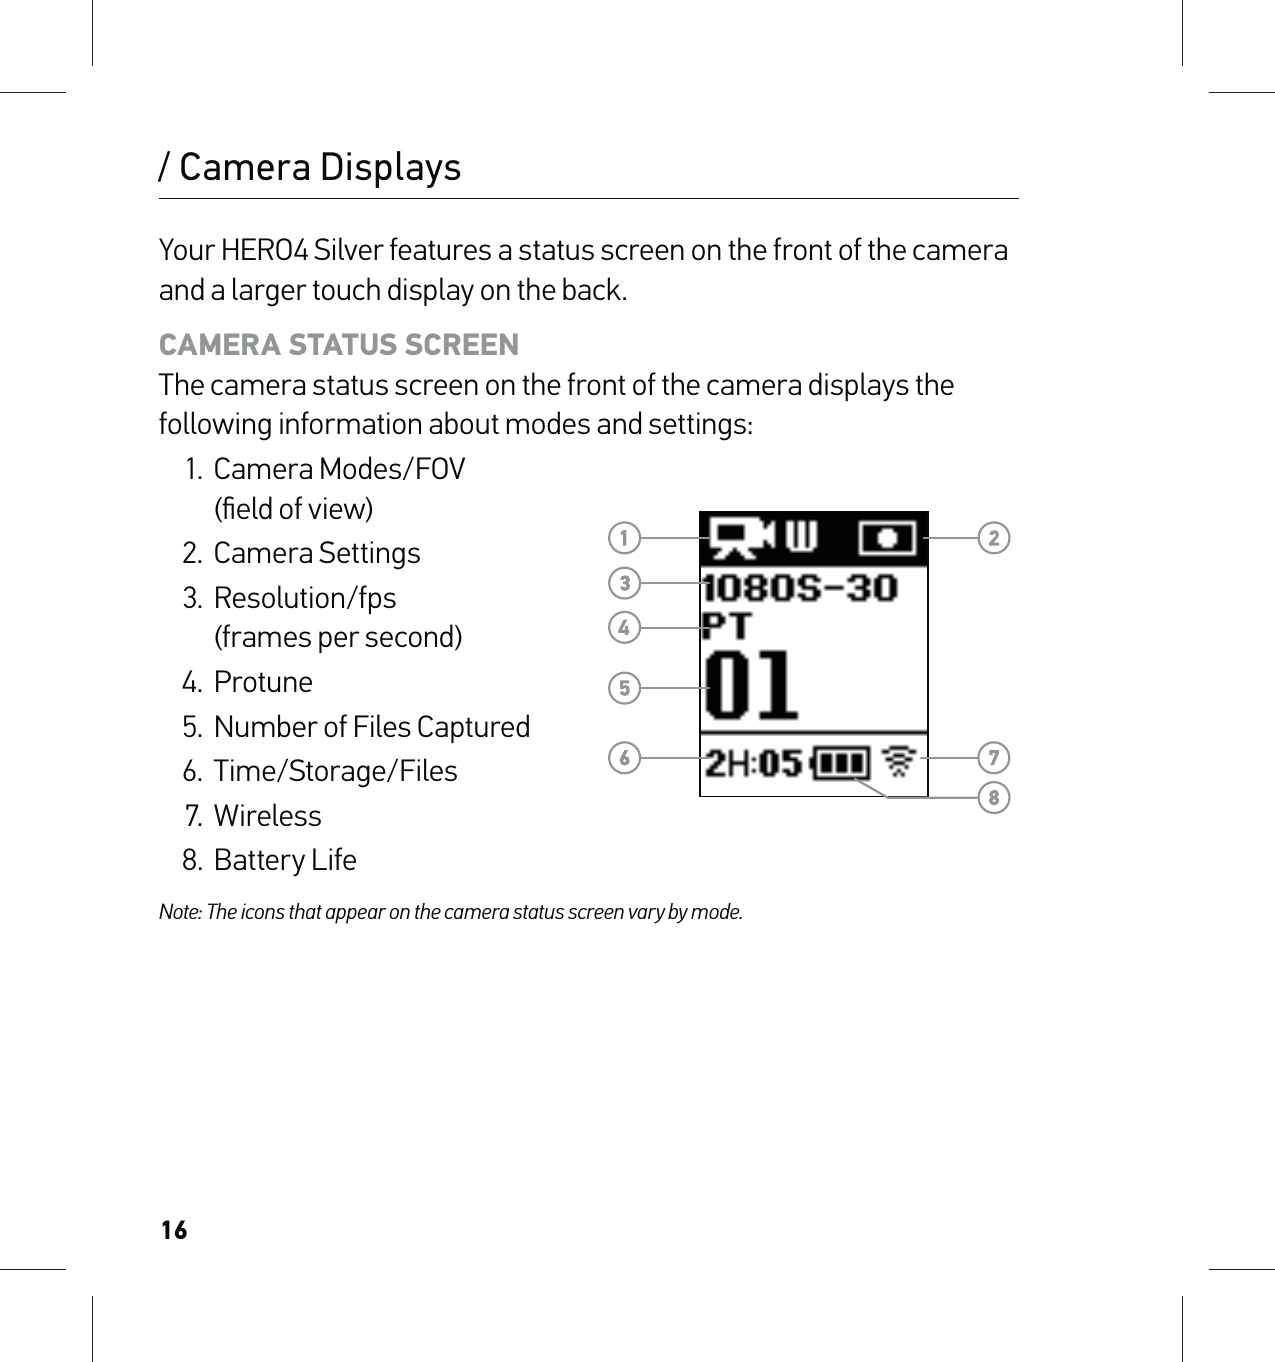 16/ Camera DisplaysYour HERO4 Silver features a status screen on the front of the camera and a larger touch display on the back.CAMERA STATUS SCREEN The camera status screen on the front of the camera displays the following information about modes and settings:1. Camera Modes/FOV  (ﬁeld of view)2. Camera Settings3. Resolution/fps  (frames per second)4. Protune5.  Number of Files Captured6. Time/Storage/Files7. Wireless8. Battery LifeNote: The icons that appear on the camera status screen vary by mode.